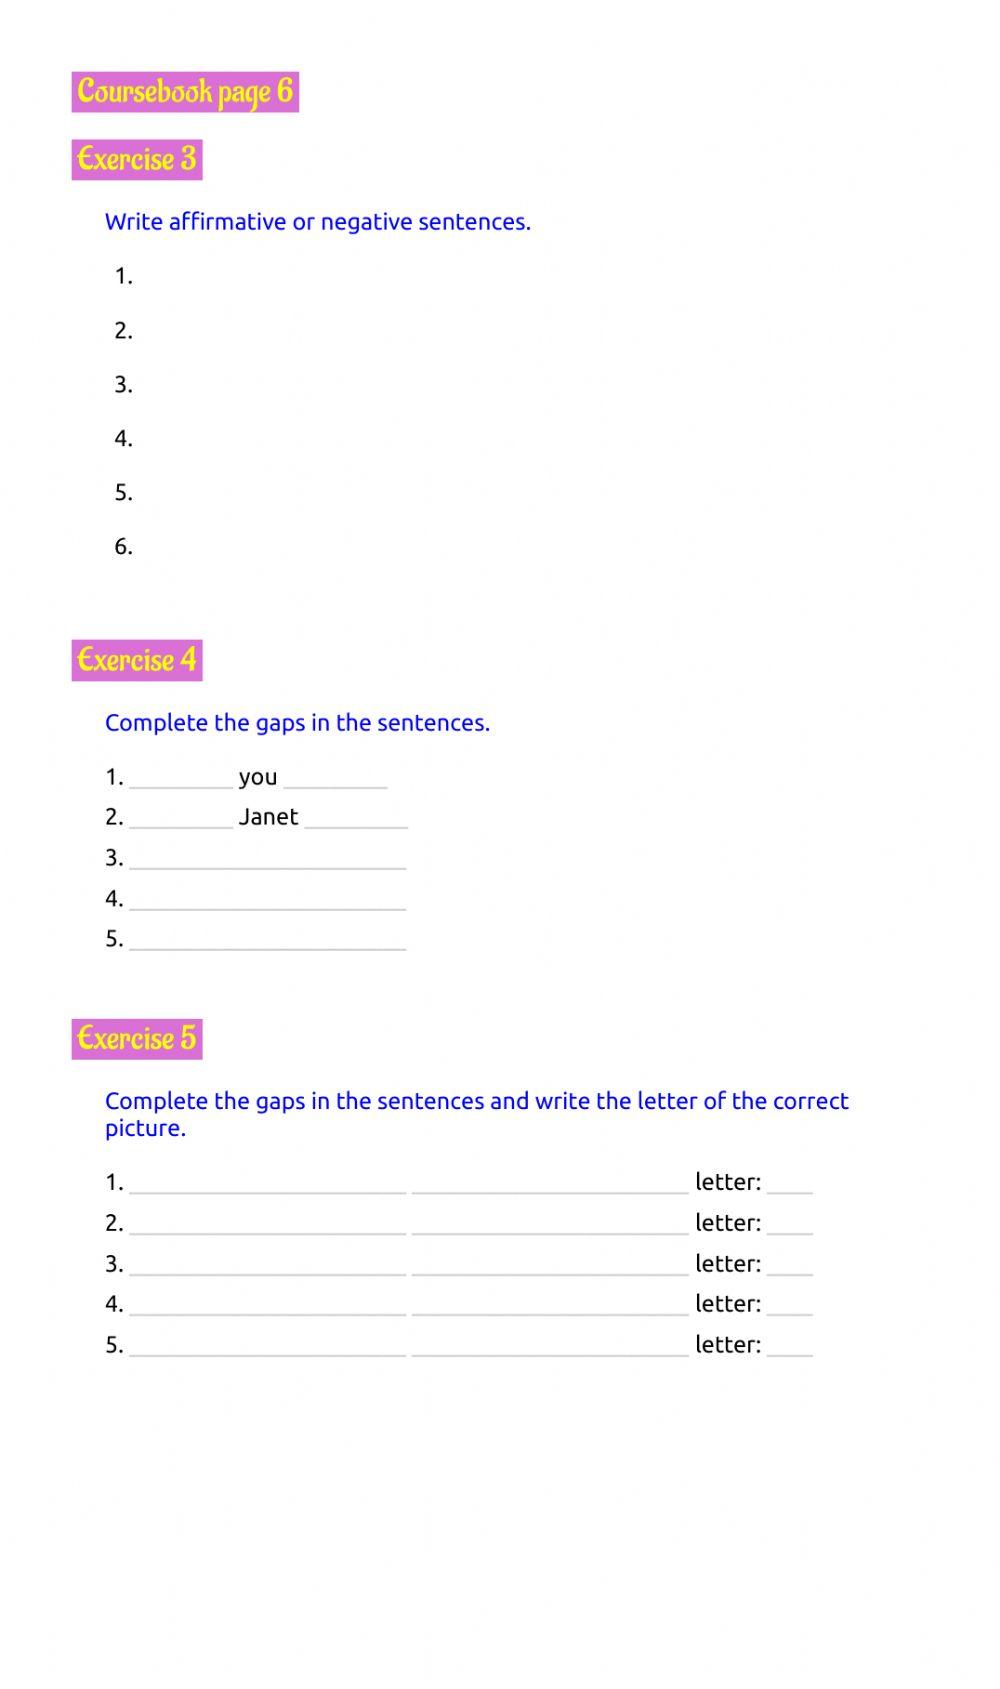 Page 6, exercises 3, 4, 5